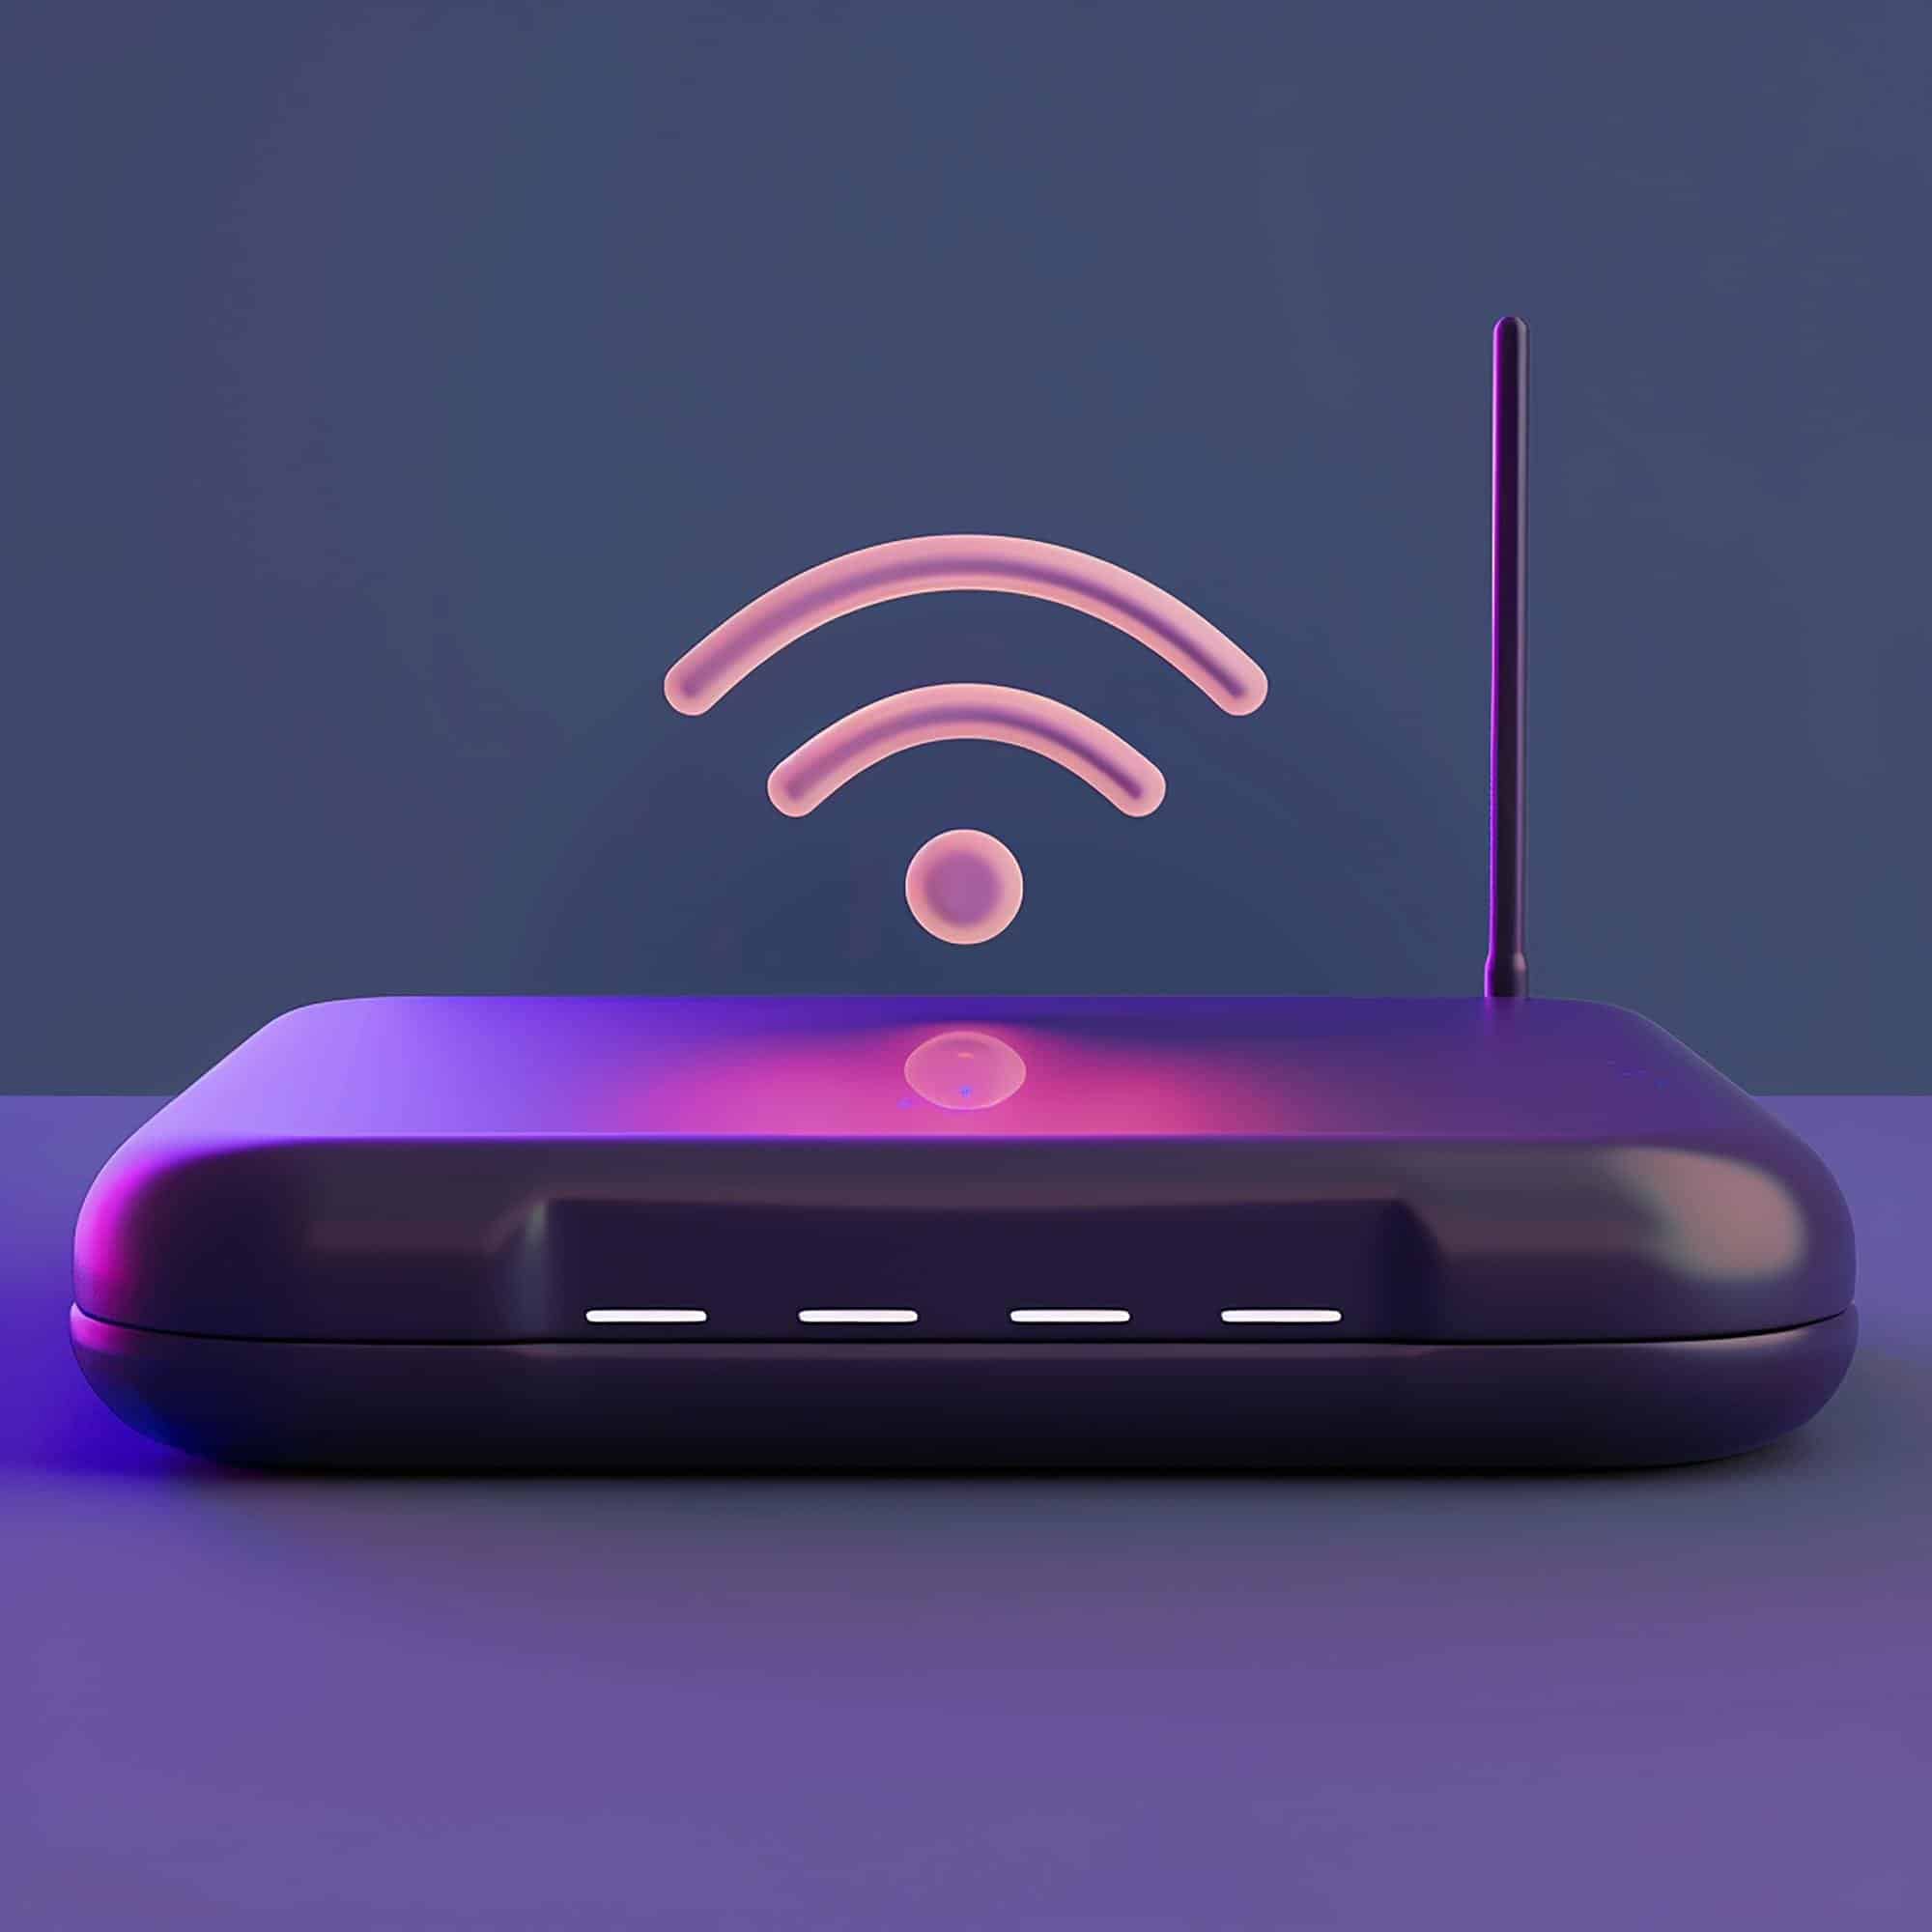 How to Troubleshoot Common Wi-Fi Issues at Home